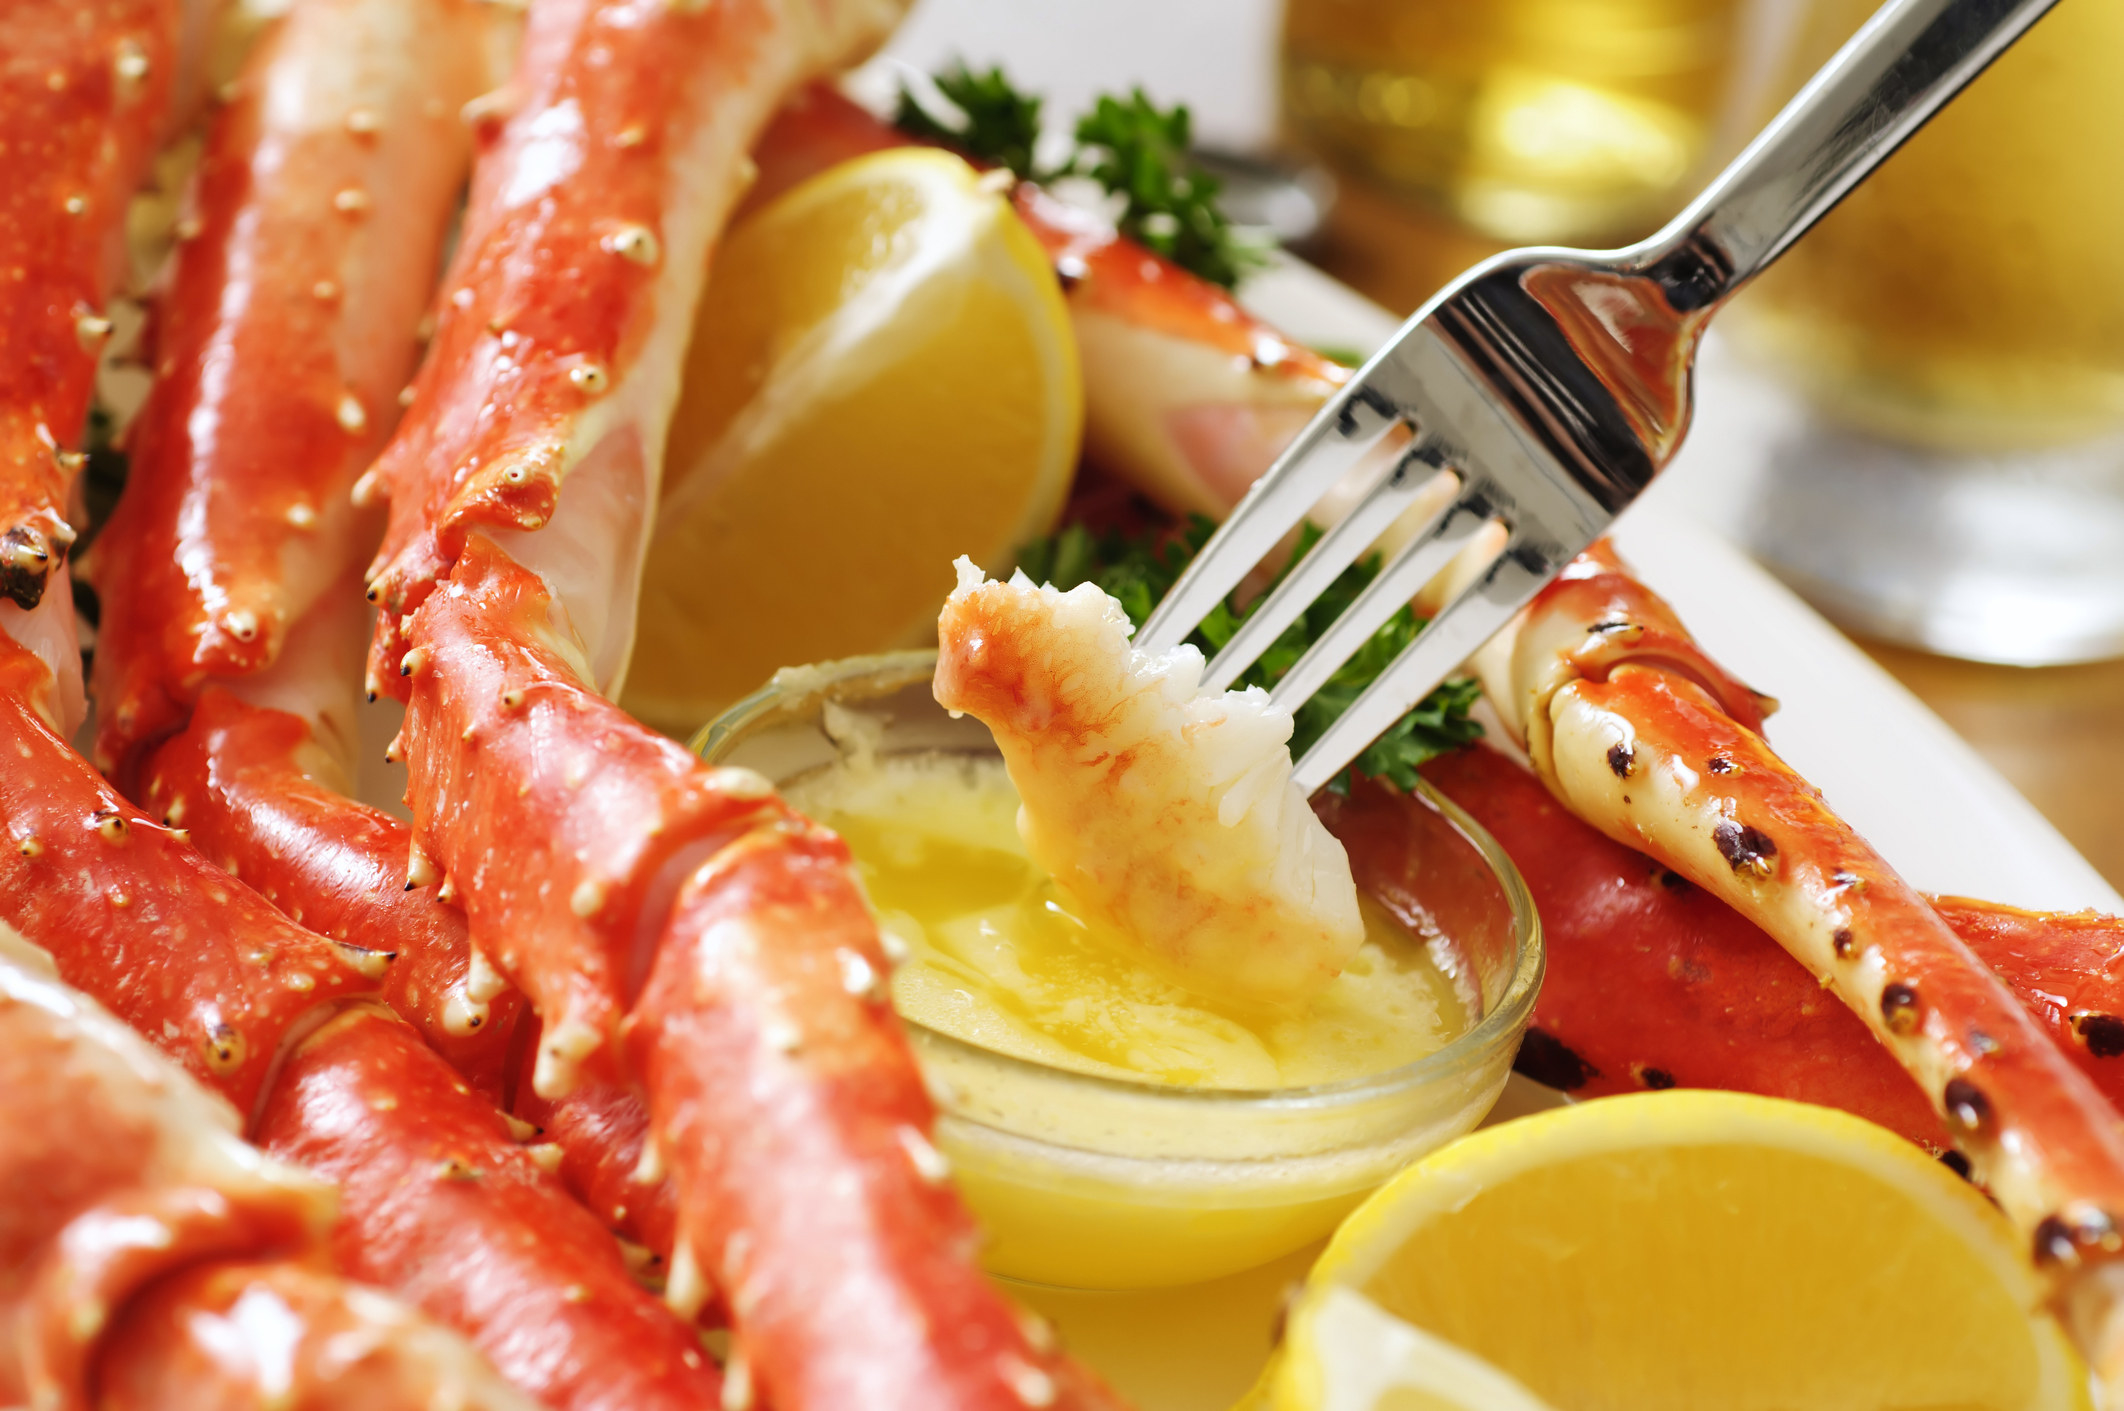 King crab legs with butter and lemon.